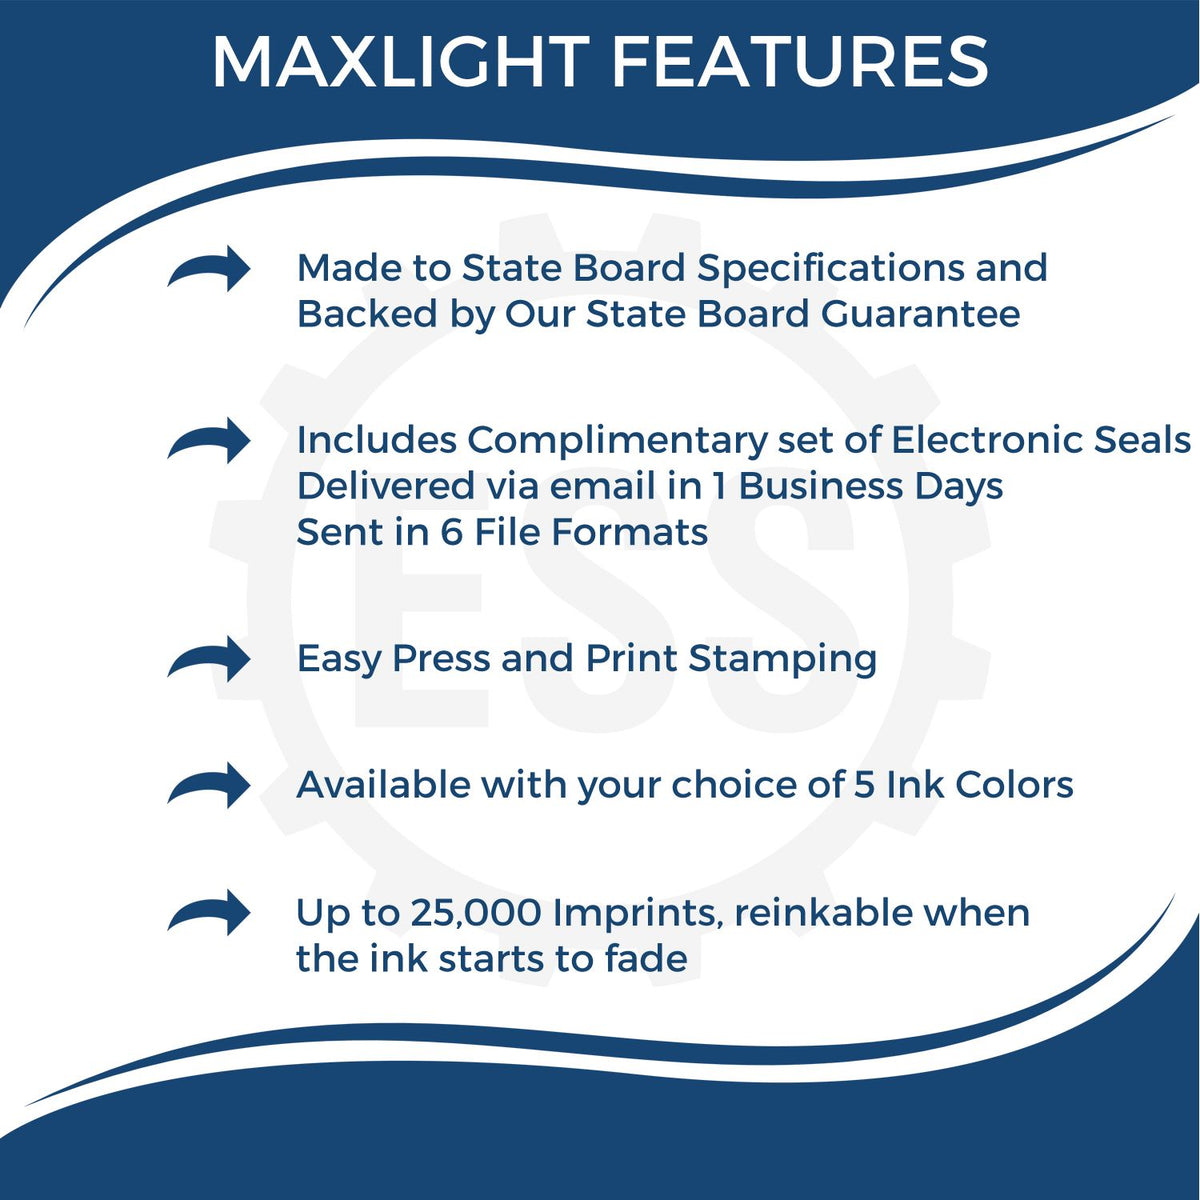 A picture of an infographic highlighting the selling points for the MaxLight Premium Pre-Inked Idaho Rectangular Notarial Stamp